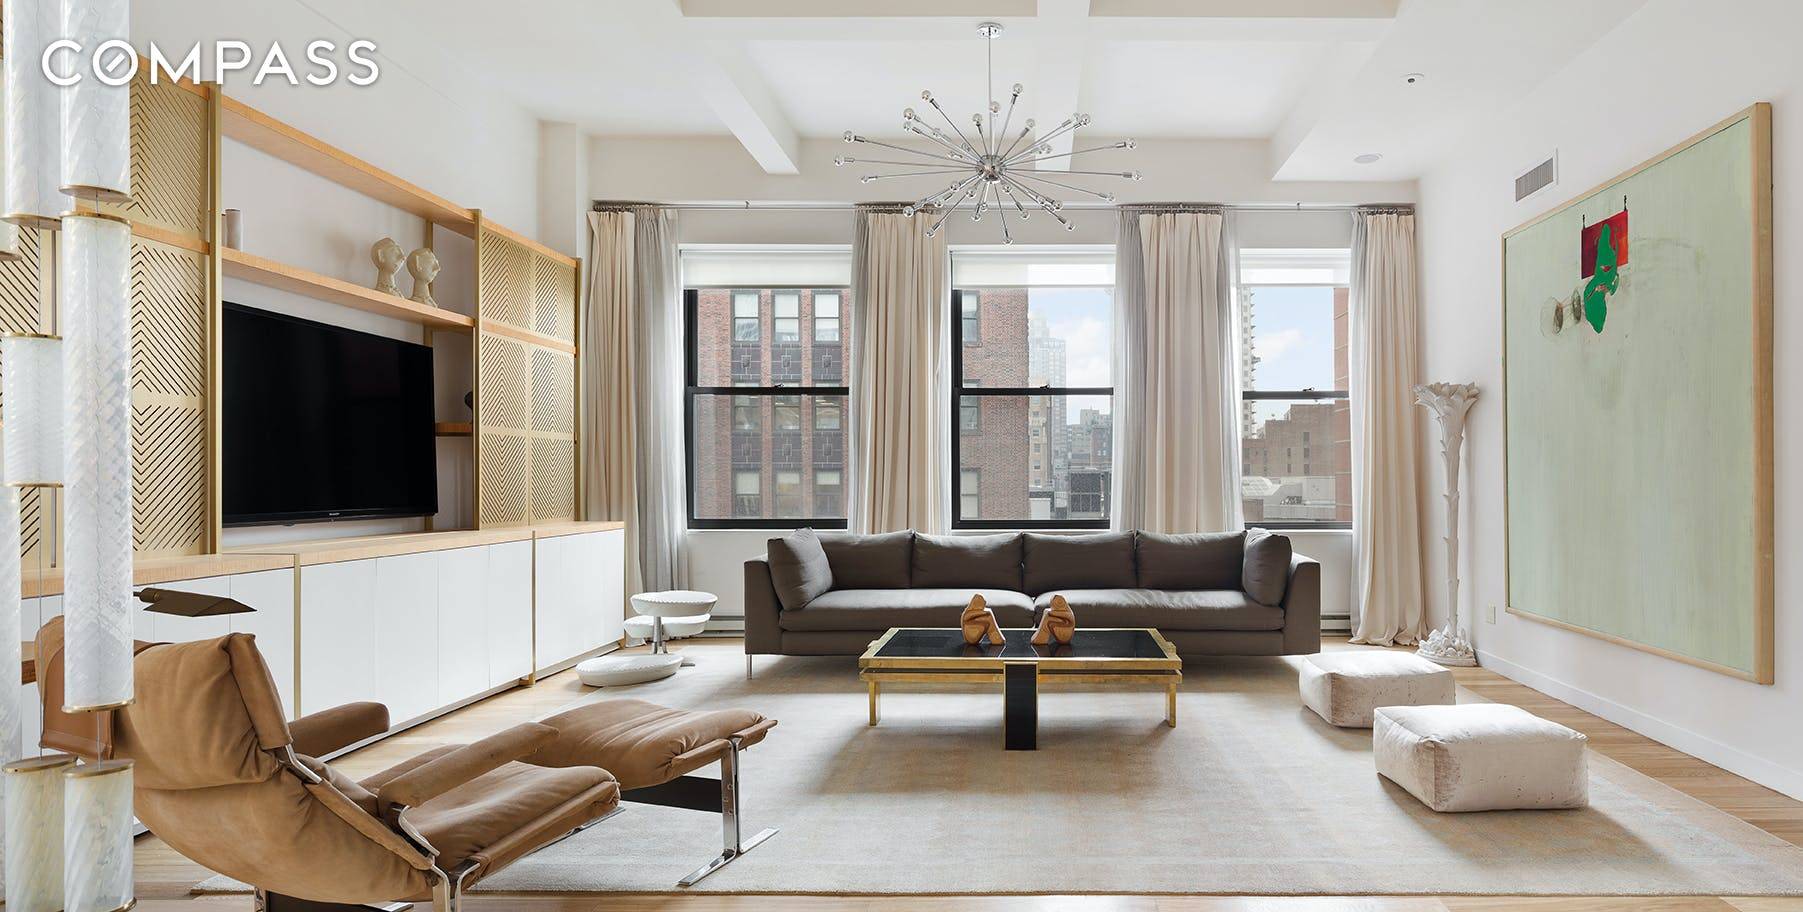 A very serene PH is available in a boutique condo building just off 5th Avenue with Empire State Building views.